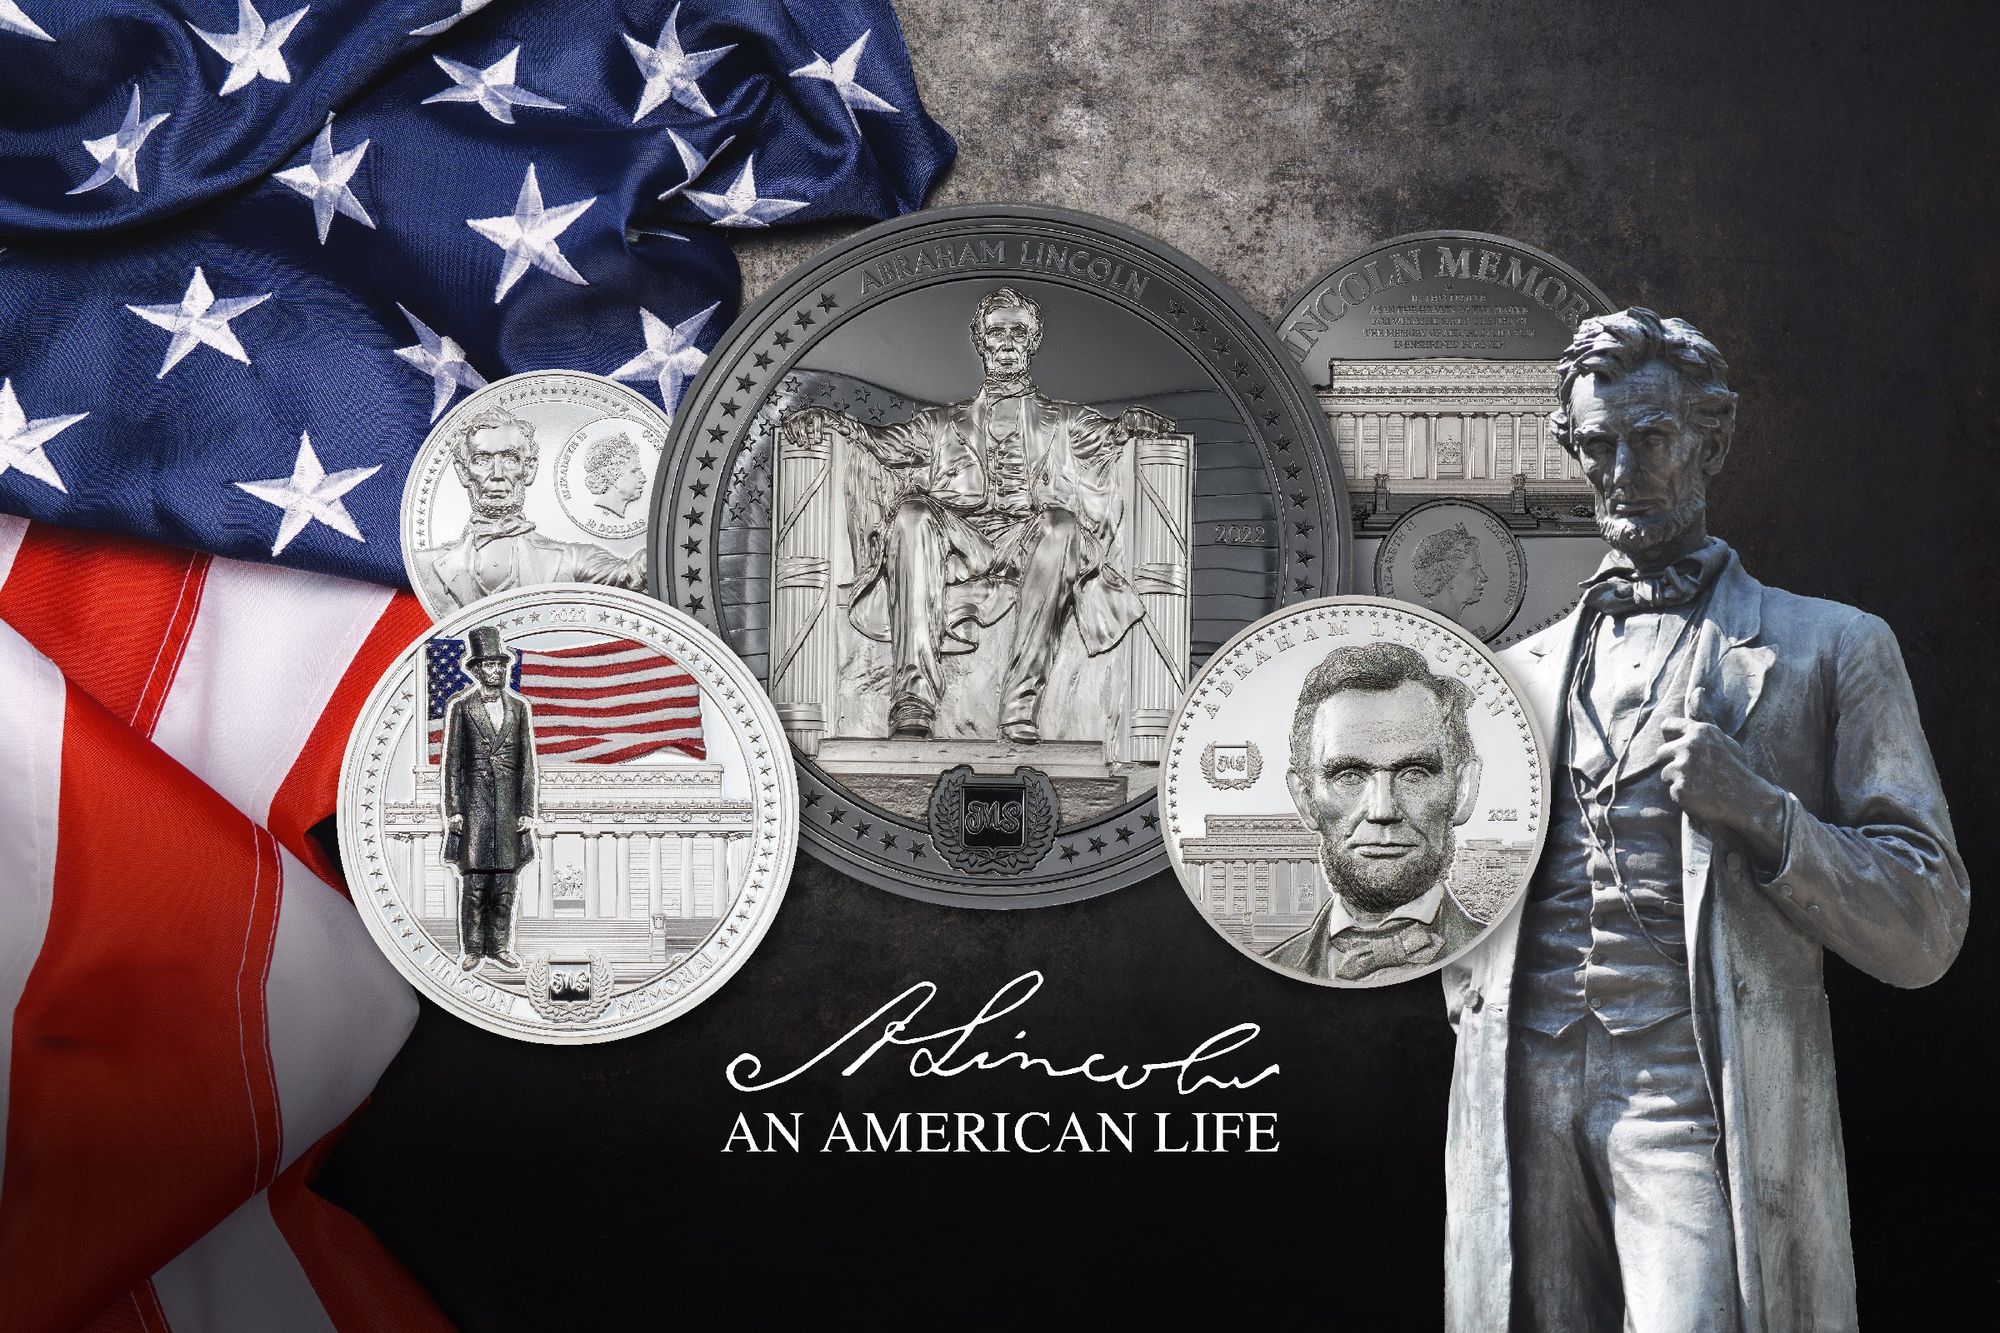 2022 Abraham Lincoln Silver Coin Collection designed by Miles Standish